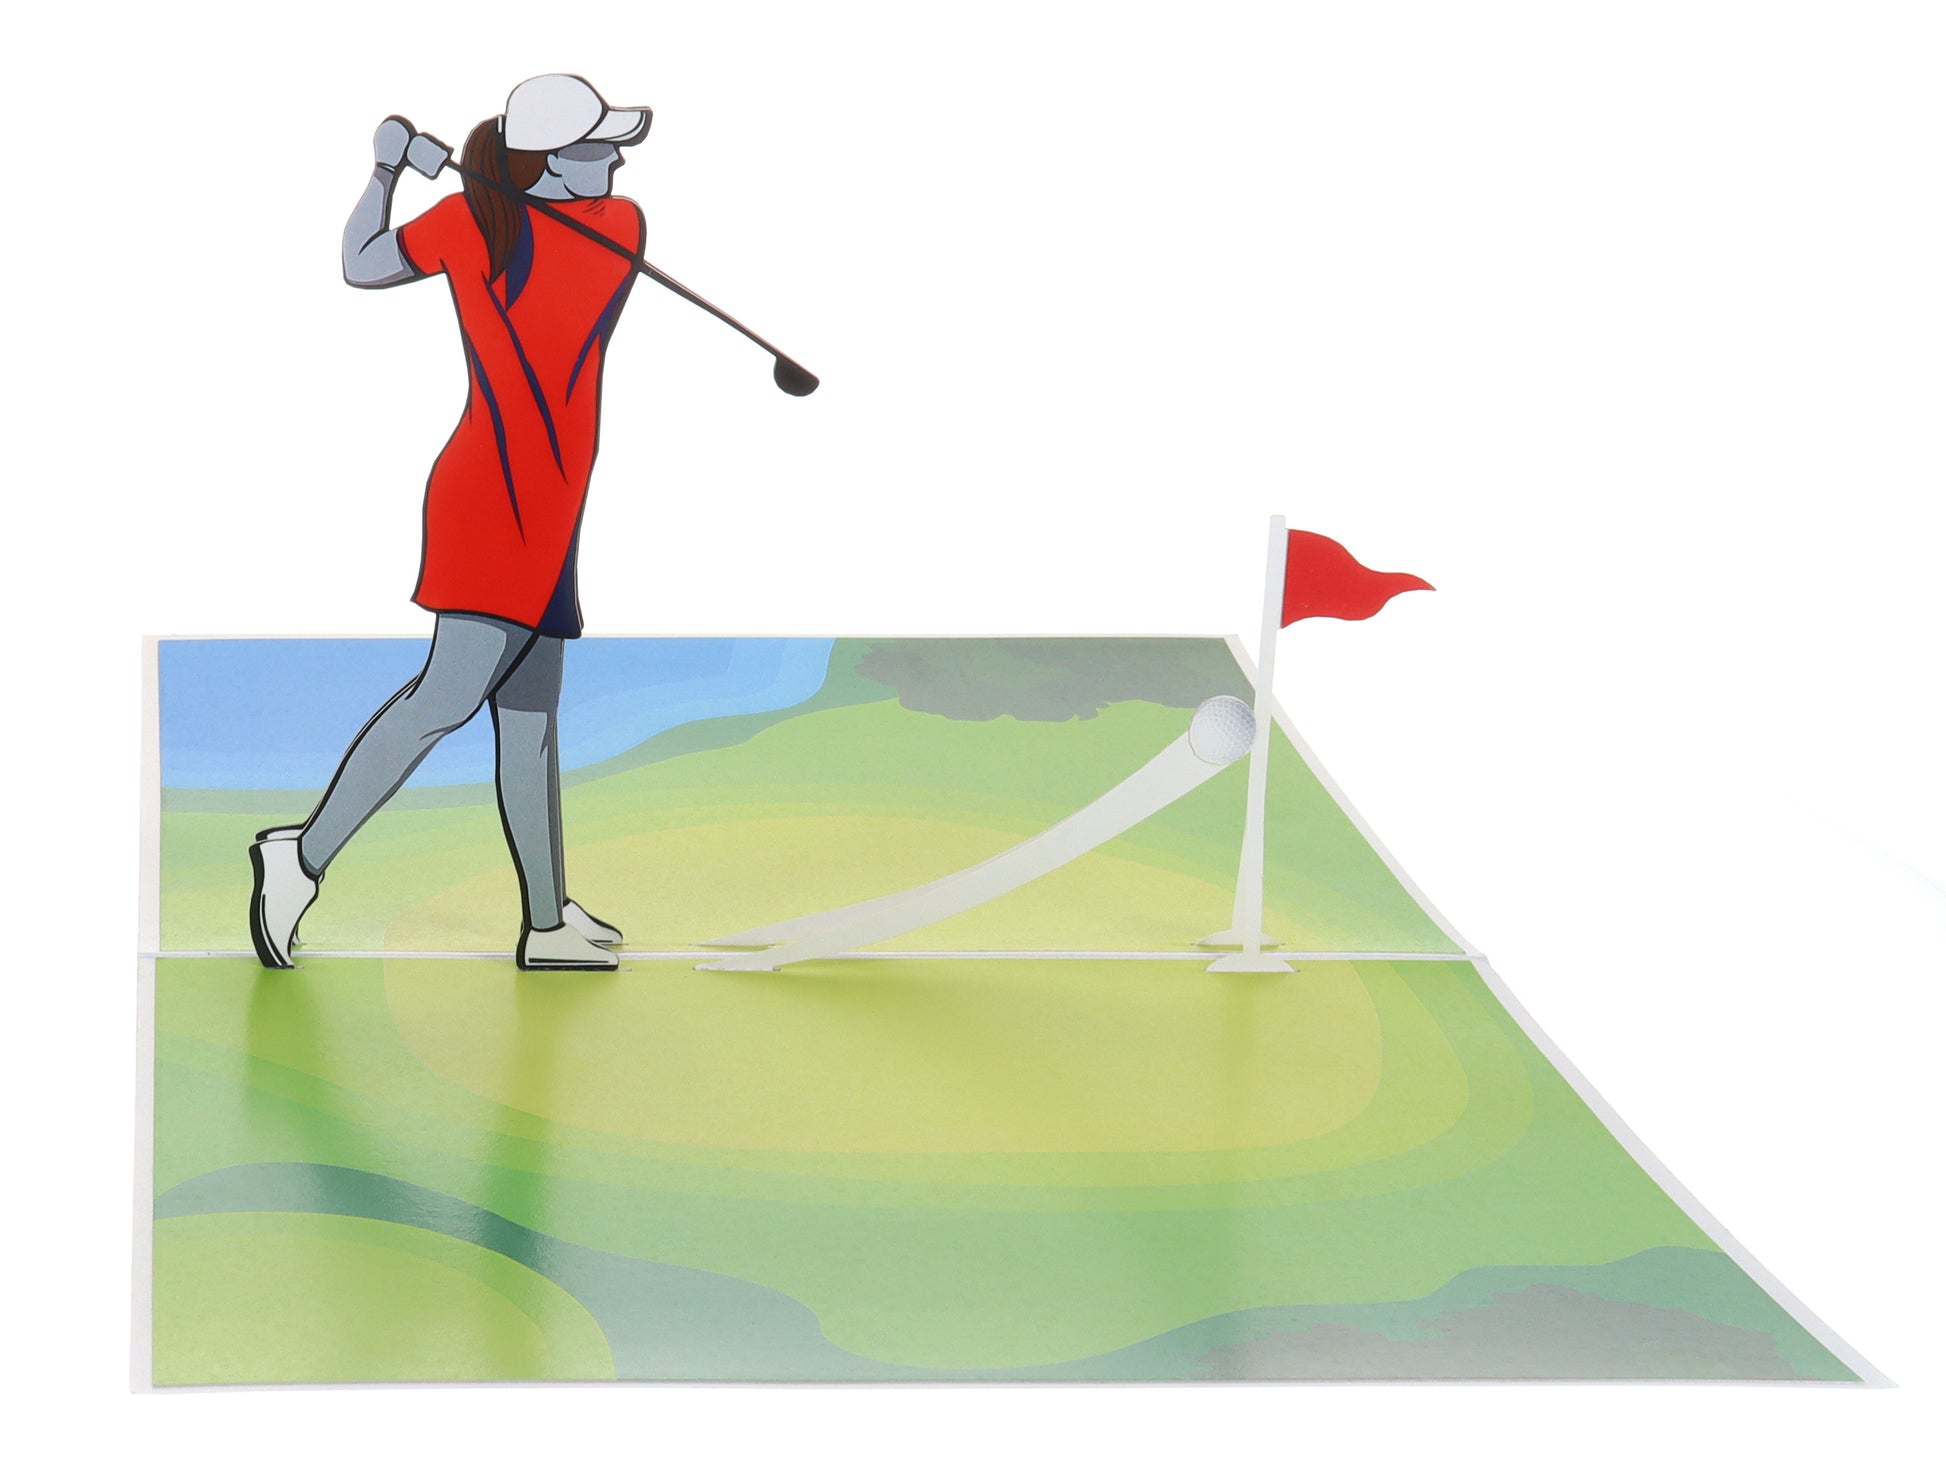 Awesome Lady Golf Card 3D Pop Up Greeting Card - Congrats - Congratulations - Get Well - Graduation - iGifts And Cards